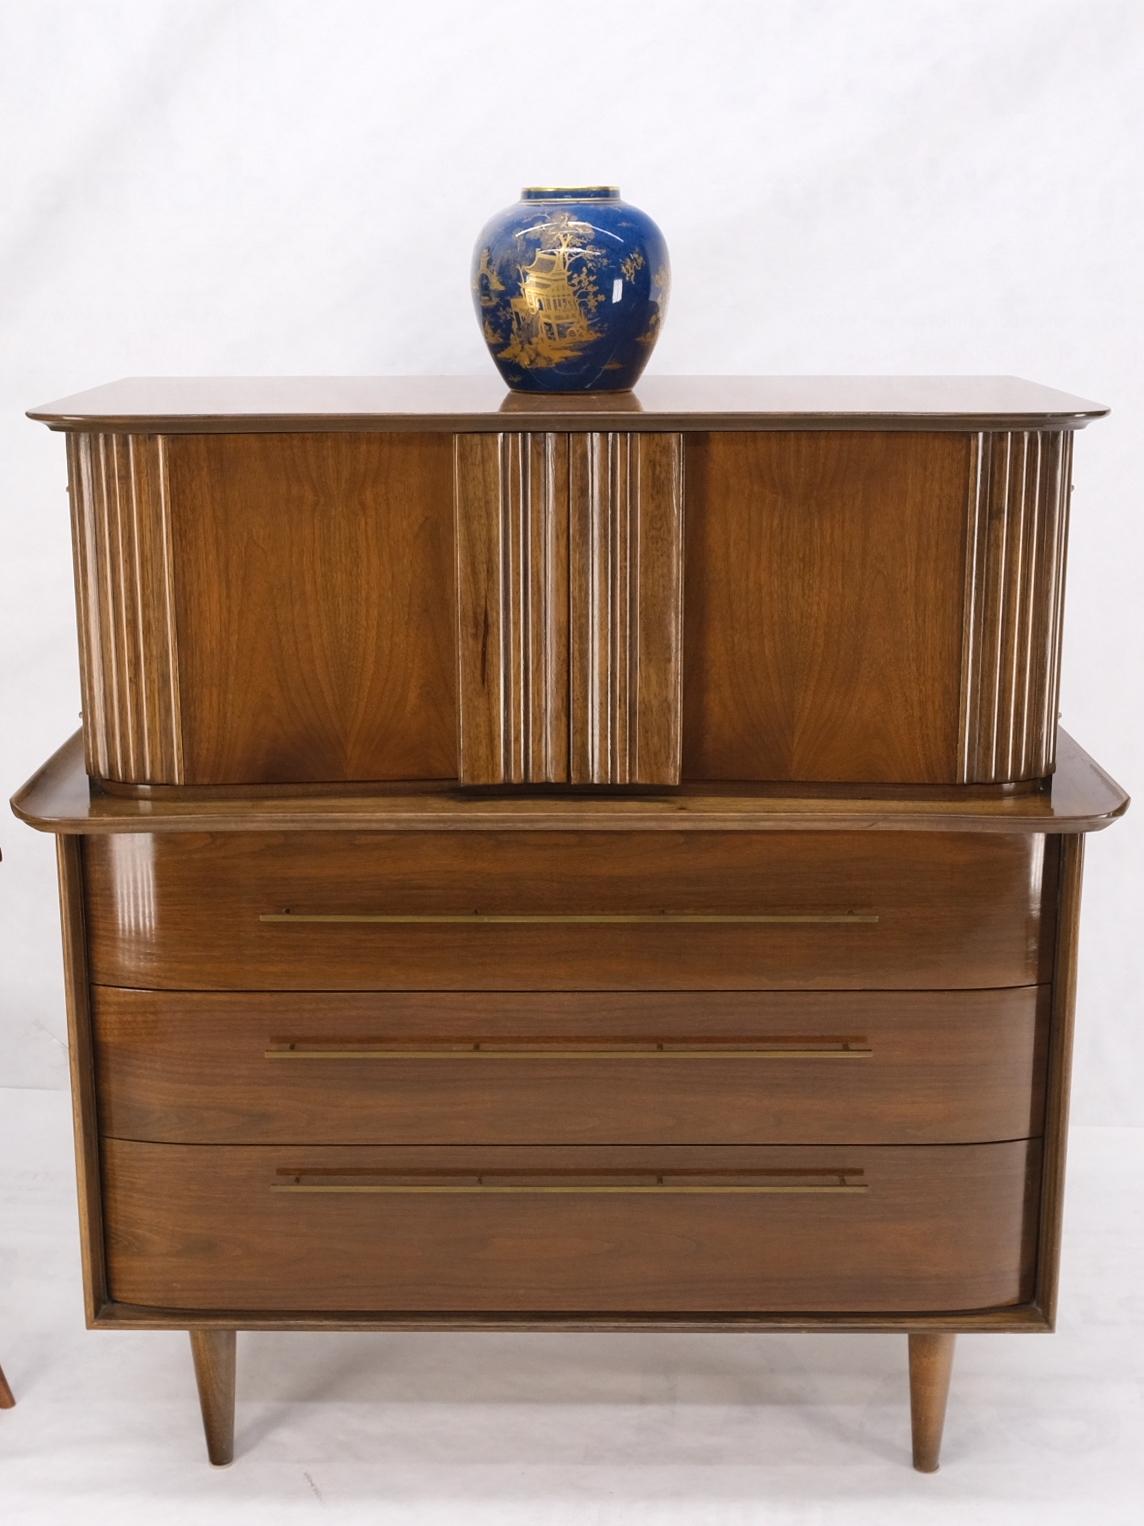 Light Walnut Bow Front Drawers Long Brass Pull Hardware Gentleman's Chest Mint For Sale 10